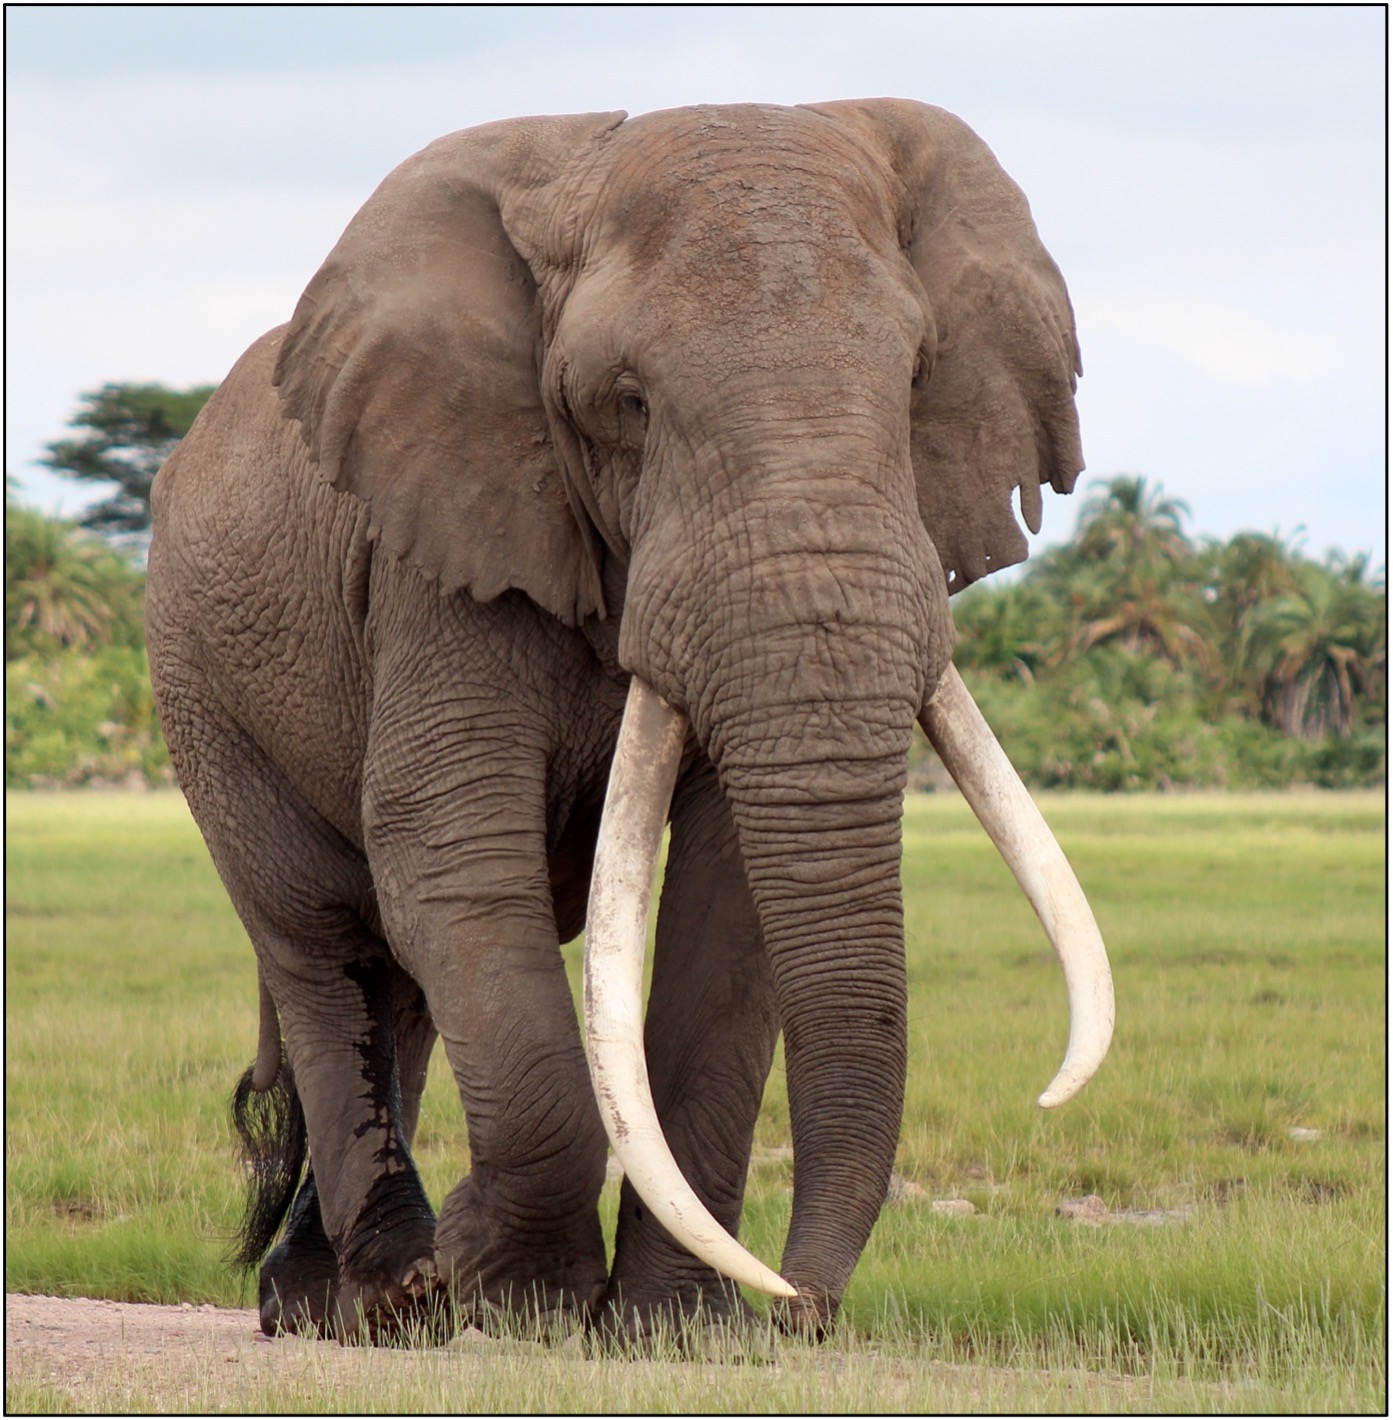 Tim was one of Amboseli's lucky males, because he was able to reach the age of 51 before he died of natural causes. Tim fathered many calves and his offspring will pass on the genes for everything that made him magnificent and a major tourist attraction